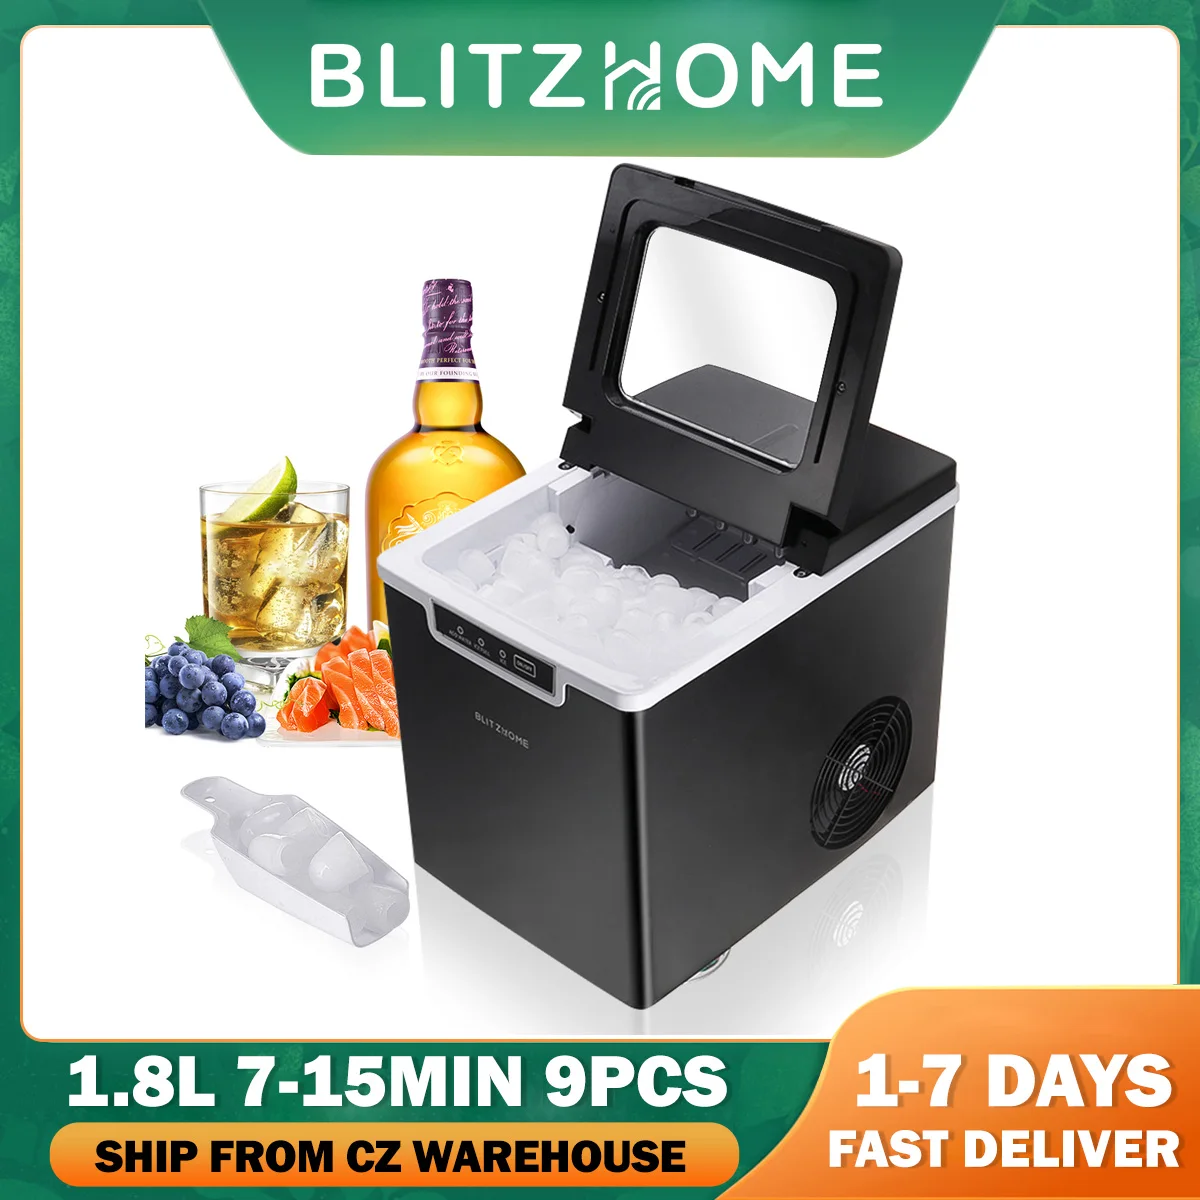 BlitzHome BH-IM2 Portable Automatic Countertop Ice Maker 7-15mins Fast Icing 10-12Kg/24h Bullet Shape Ice Low Noise for Home Bar